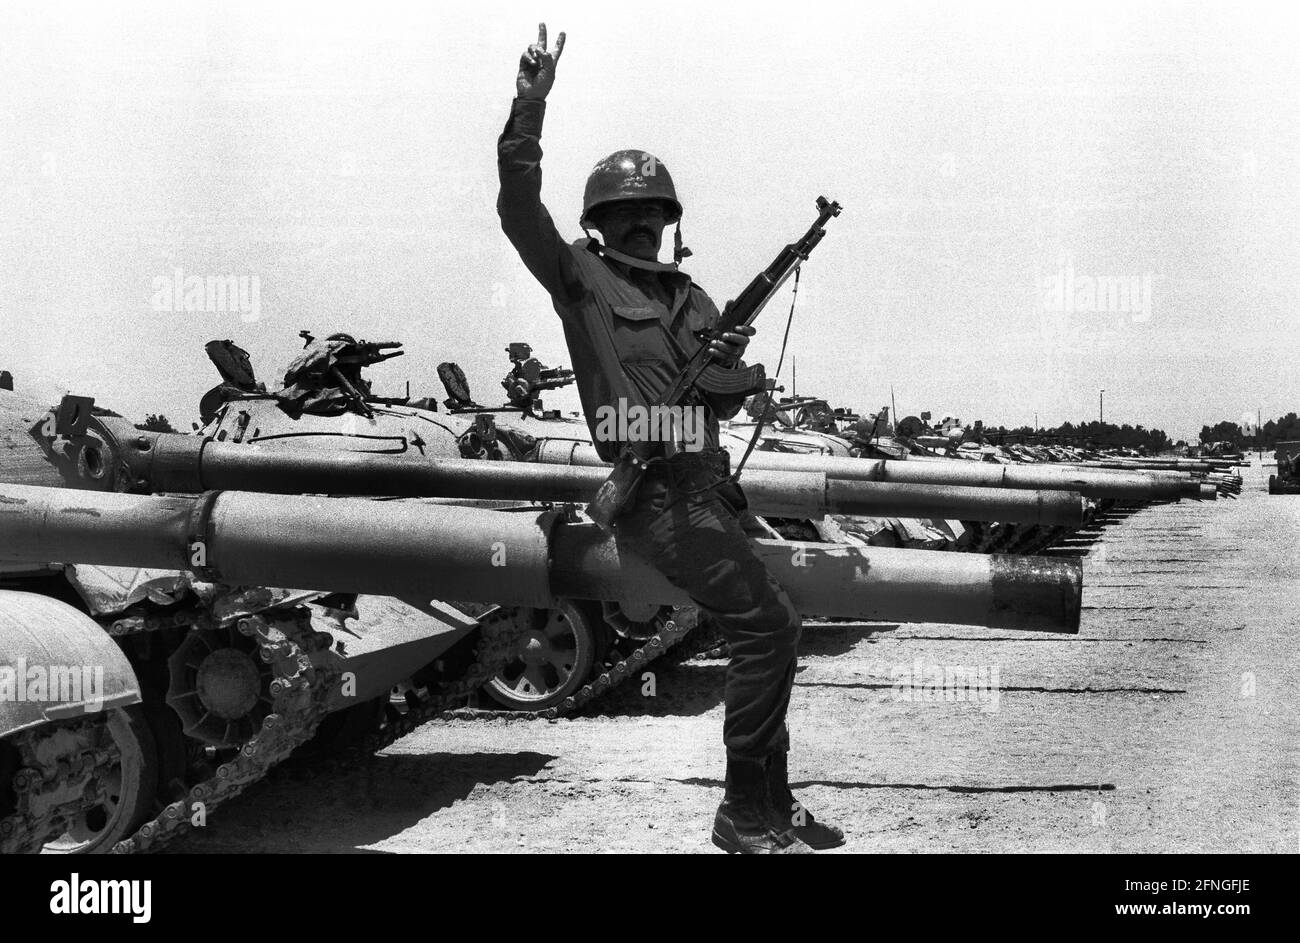 Kuwait, 8/28/1990 Archive #: 20-68 On August 2, 1990, Iraq invaded the neighboring emirate of Kuwait. Five months later, an international coalition led by the United States intervened in the conflict and pushed Iraqi forces back across the border.  Photo: Iraqi soldiers in Kuwait [automated translation] Stock Photo